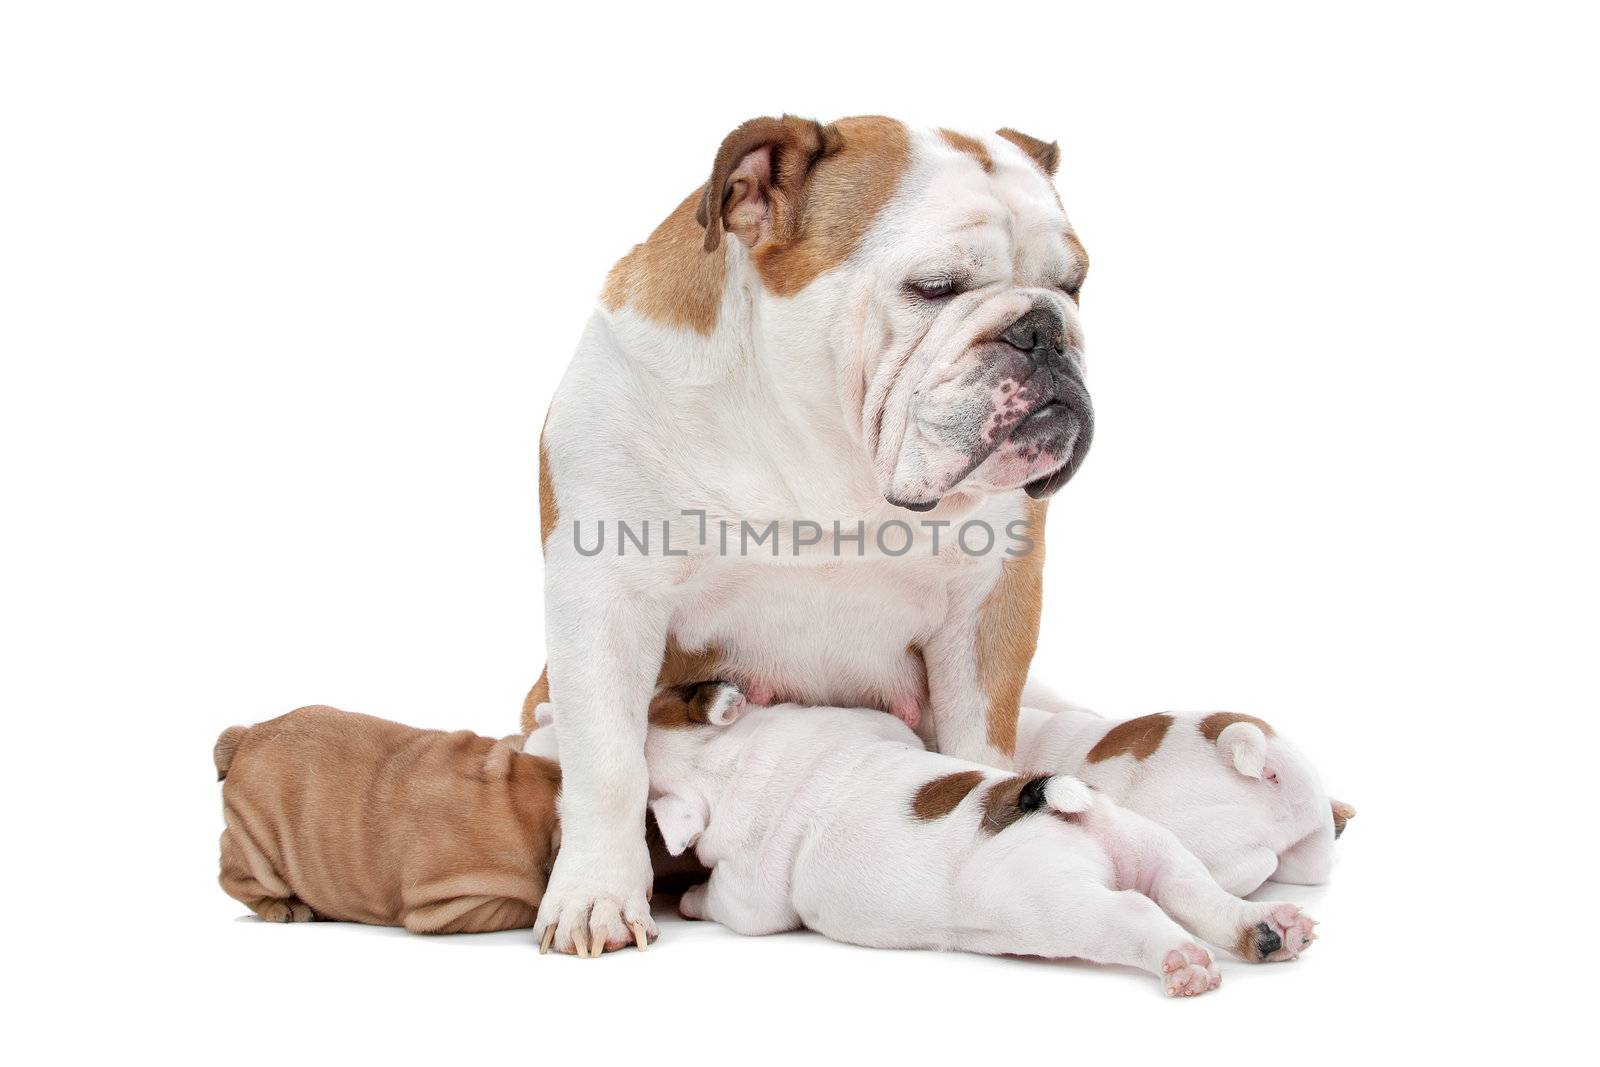 puppies drinking milk from mother dog in front of a white background